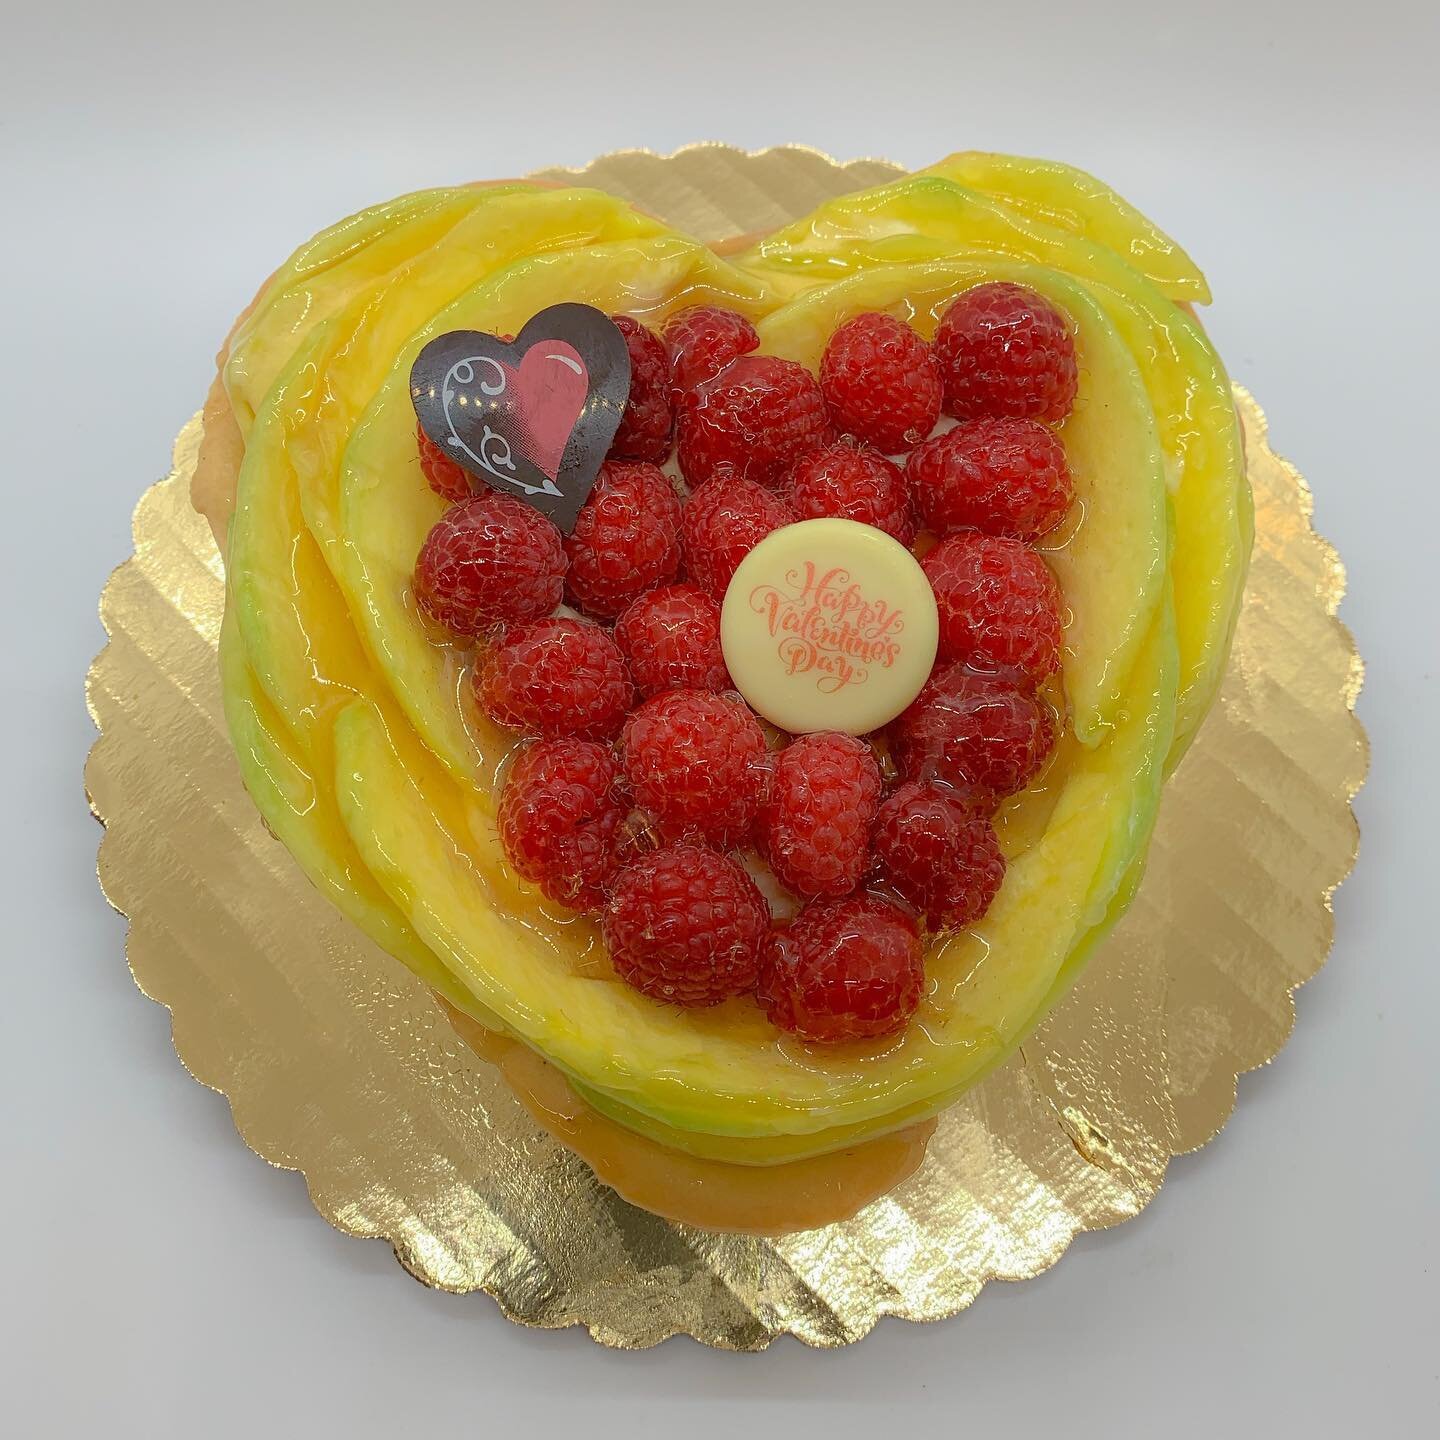 Our mango raspberry tart, perfect for a Valentine&rsquo;s day in with your boo! 😍❤️
.
.
.
.
.
#mango #raspberry #tart #french #frenchpastry #pastry #dessert #bakery #bakeryandcafe #cafe #slc #slcbakery #delicebakeryandcafe #delicebakeryandcafeslc #s